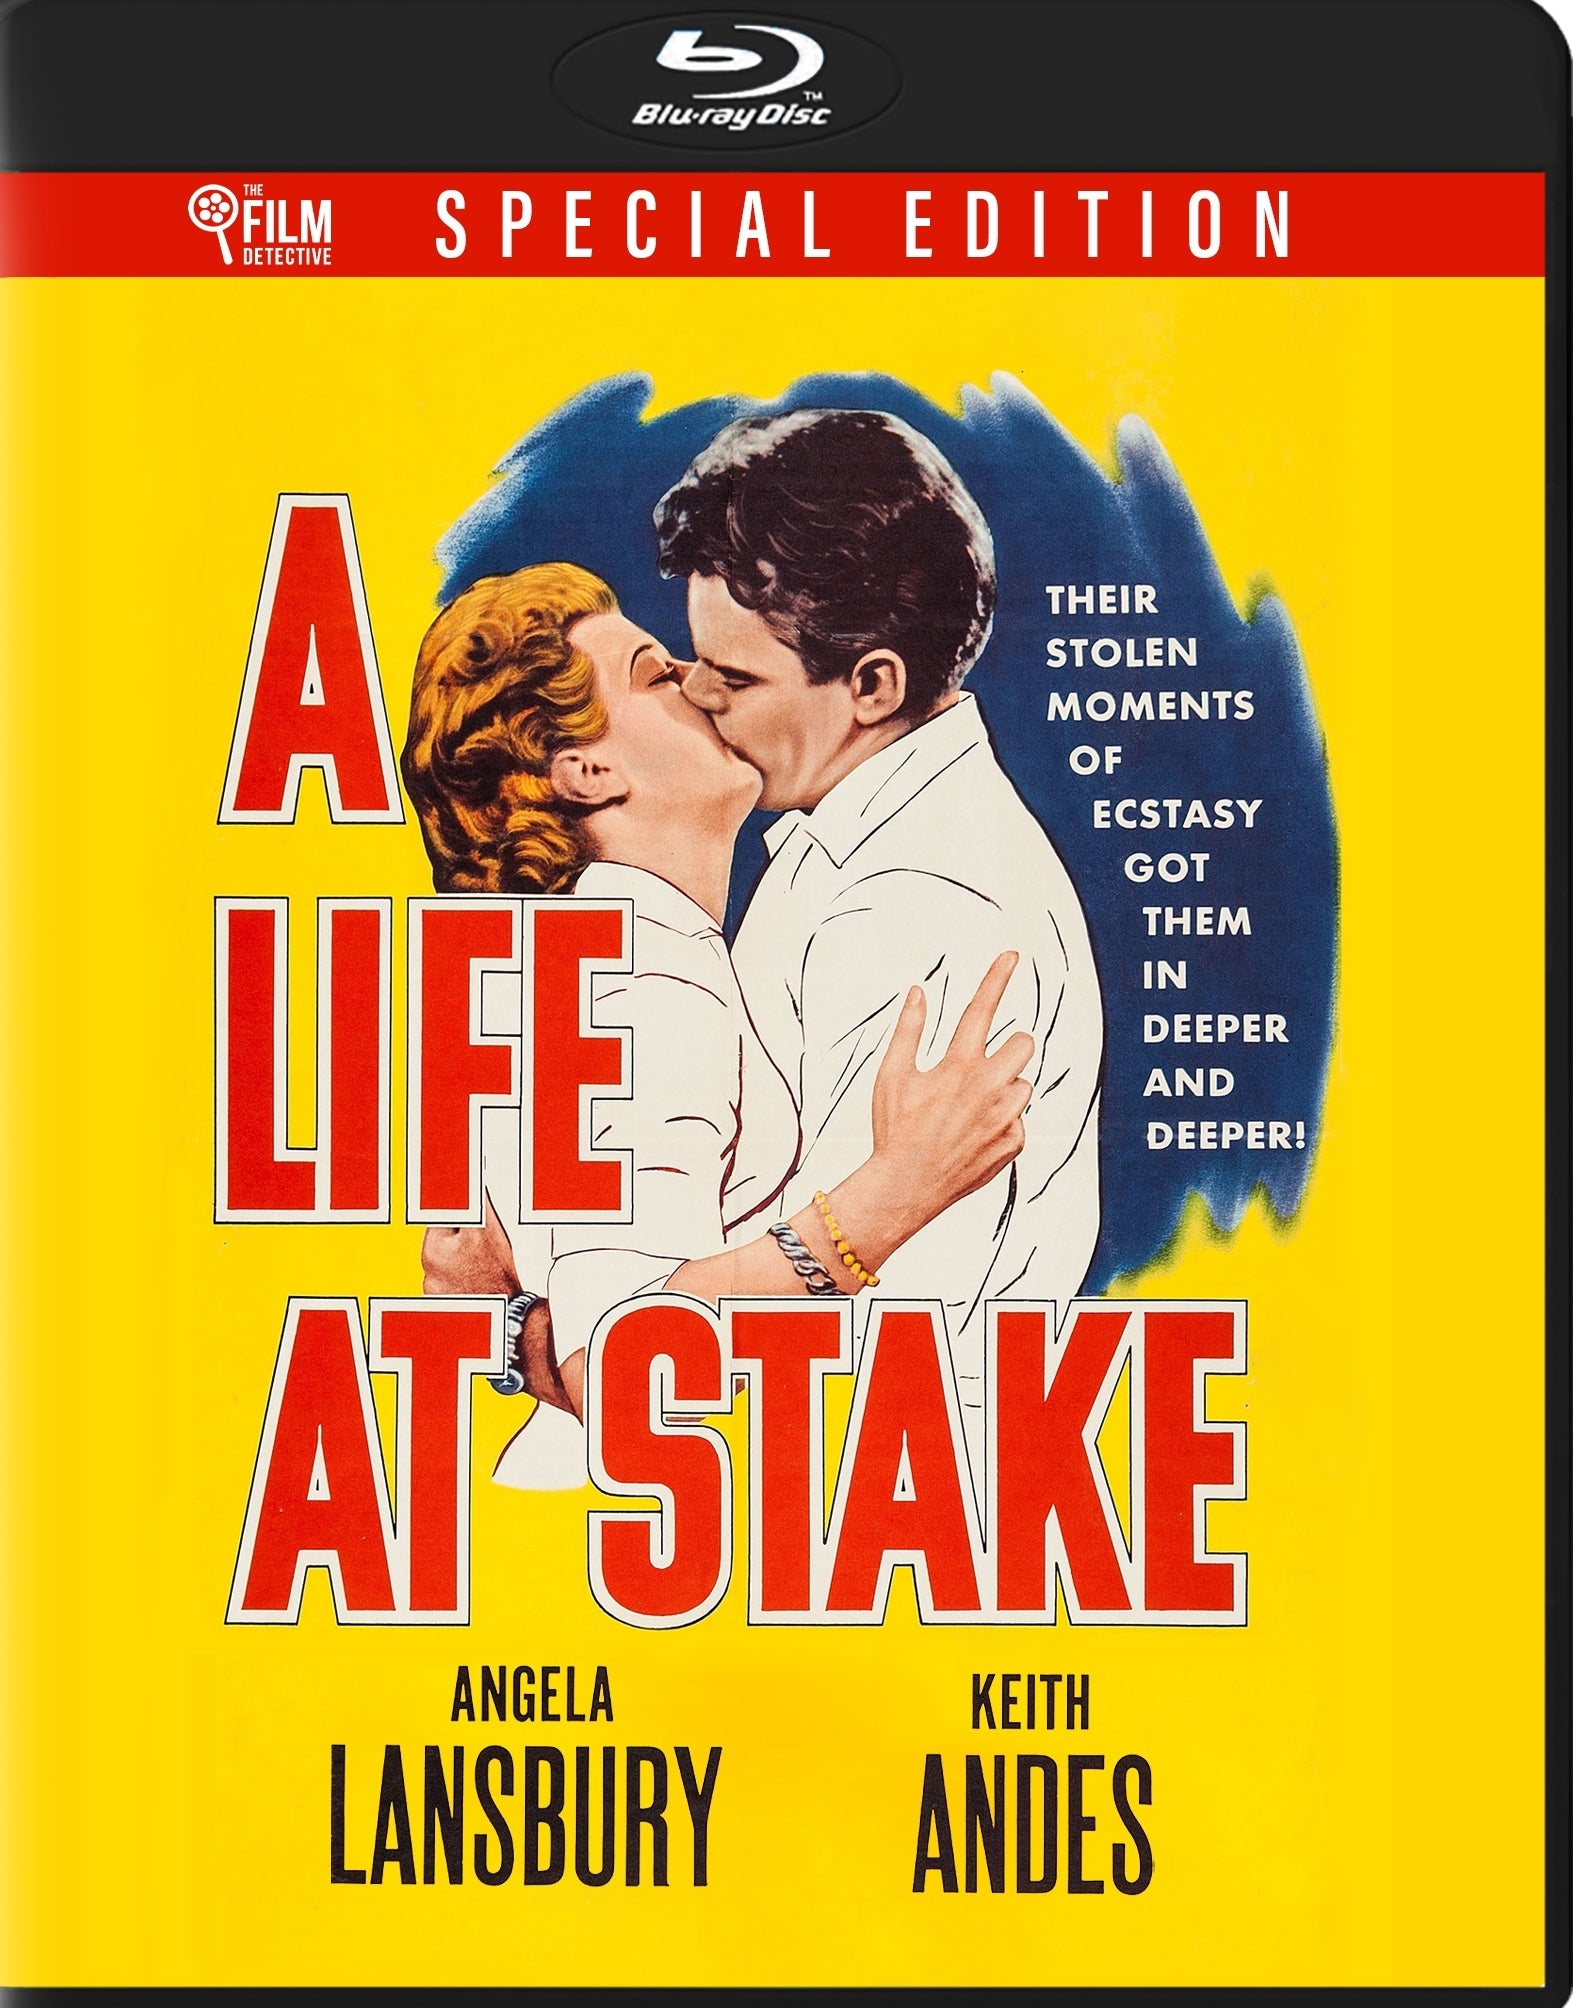 Life at Stake [Blu-ray] cover art